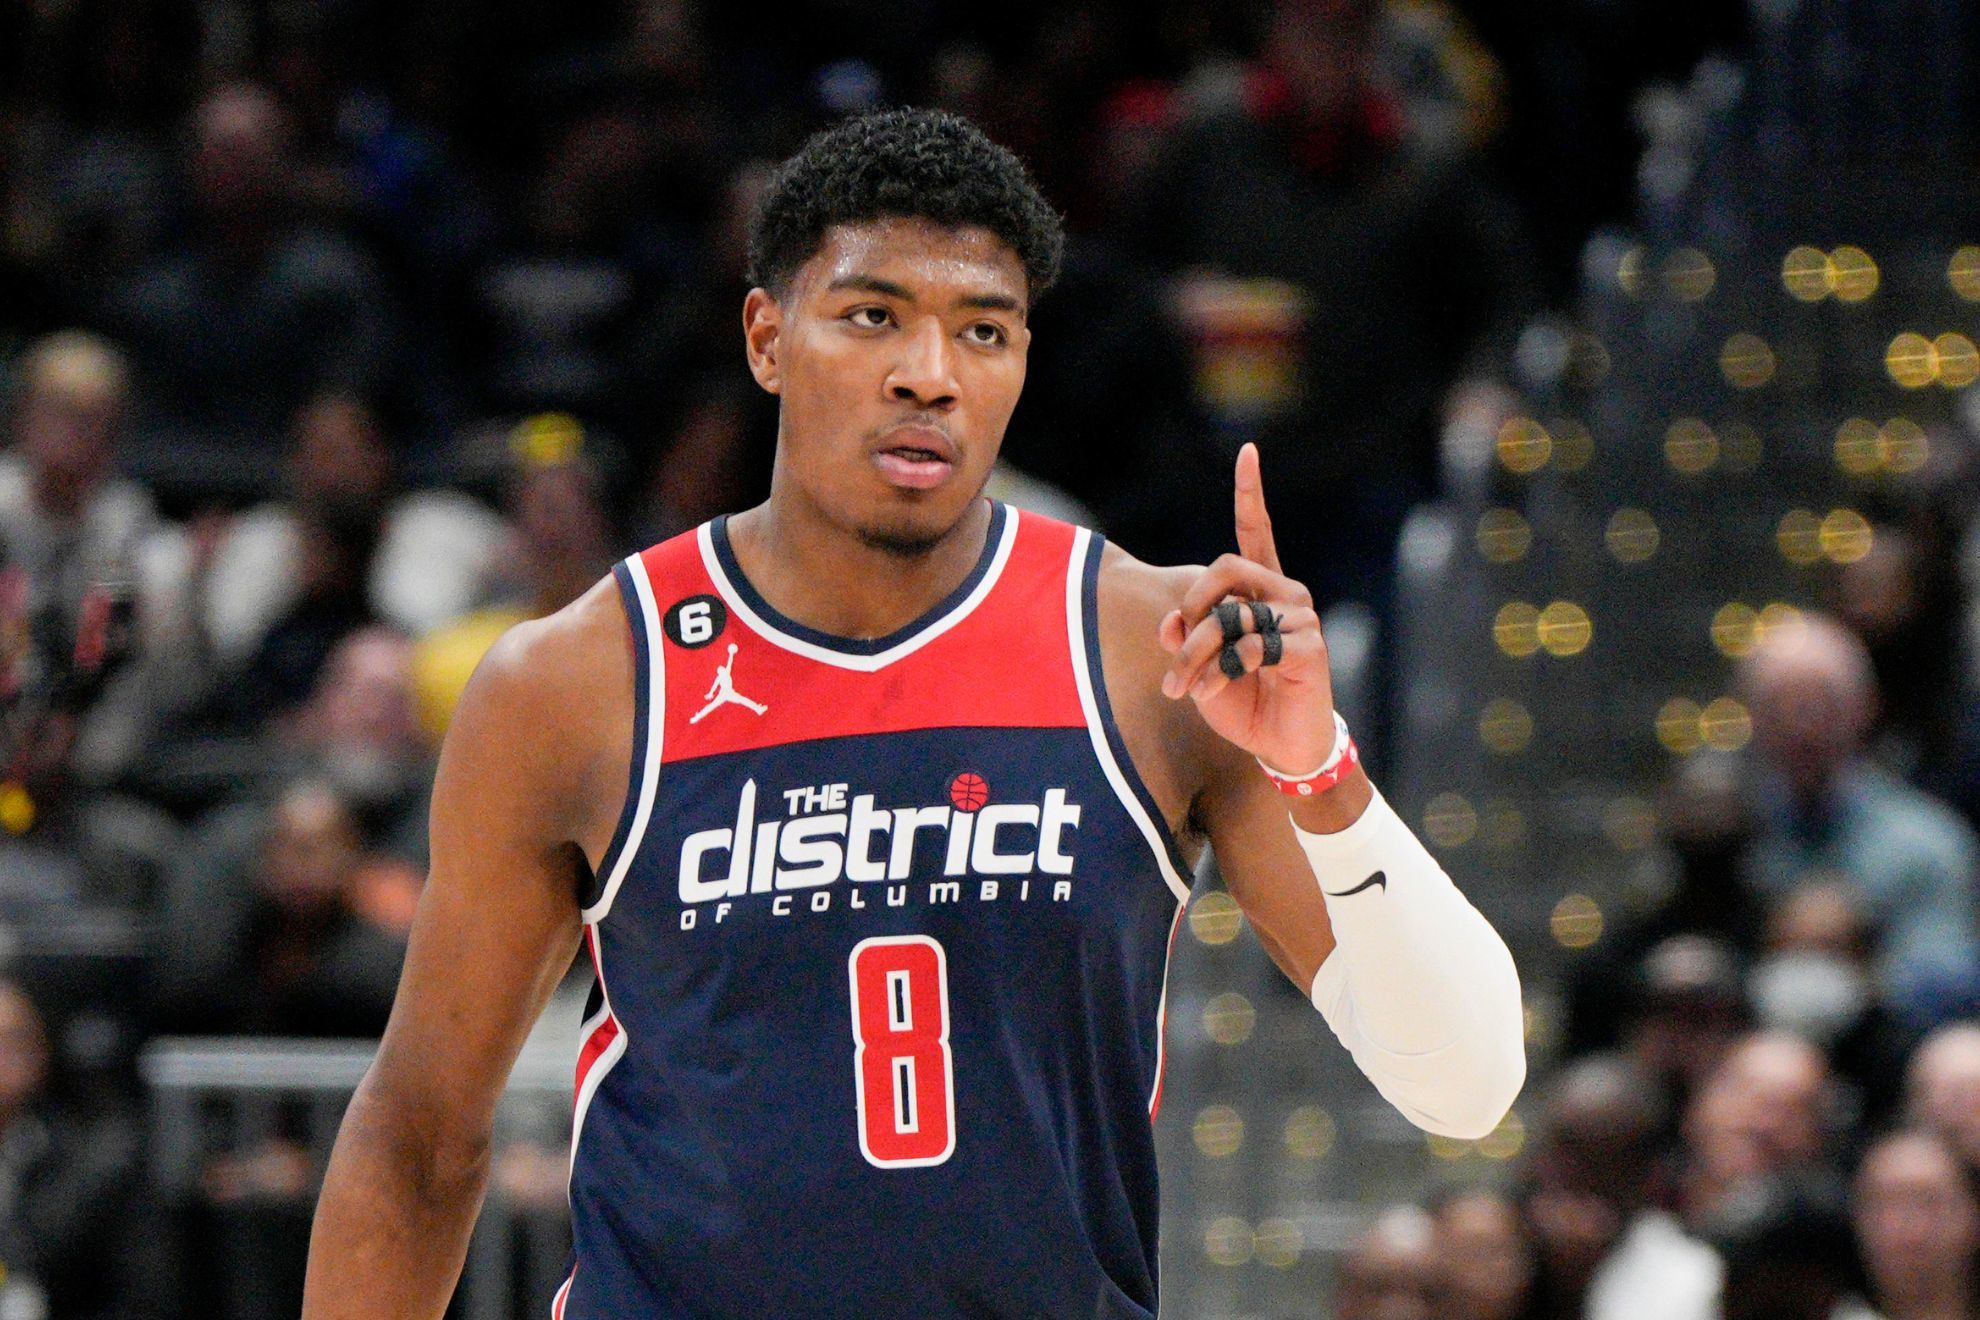 Rui Hachimura joins LeBron James and the Lakers